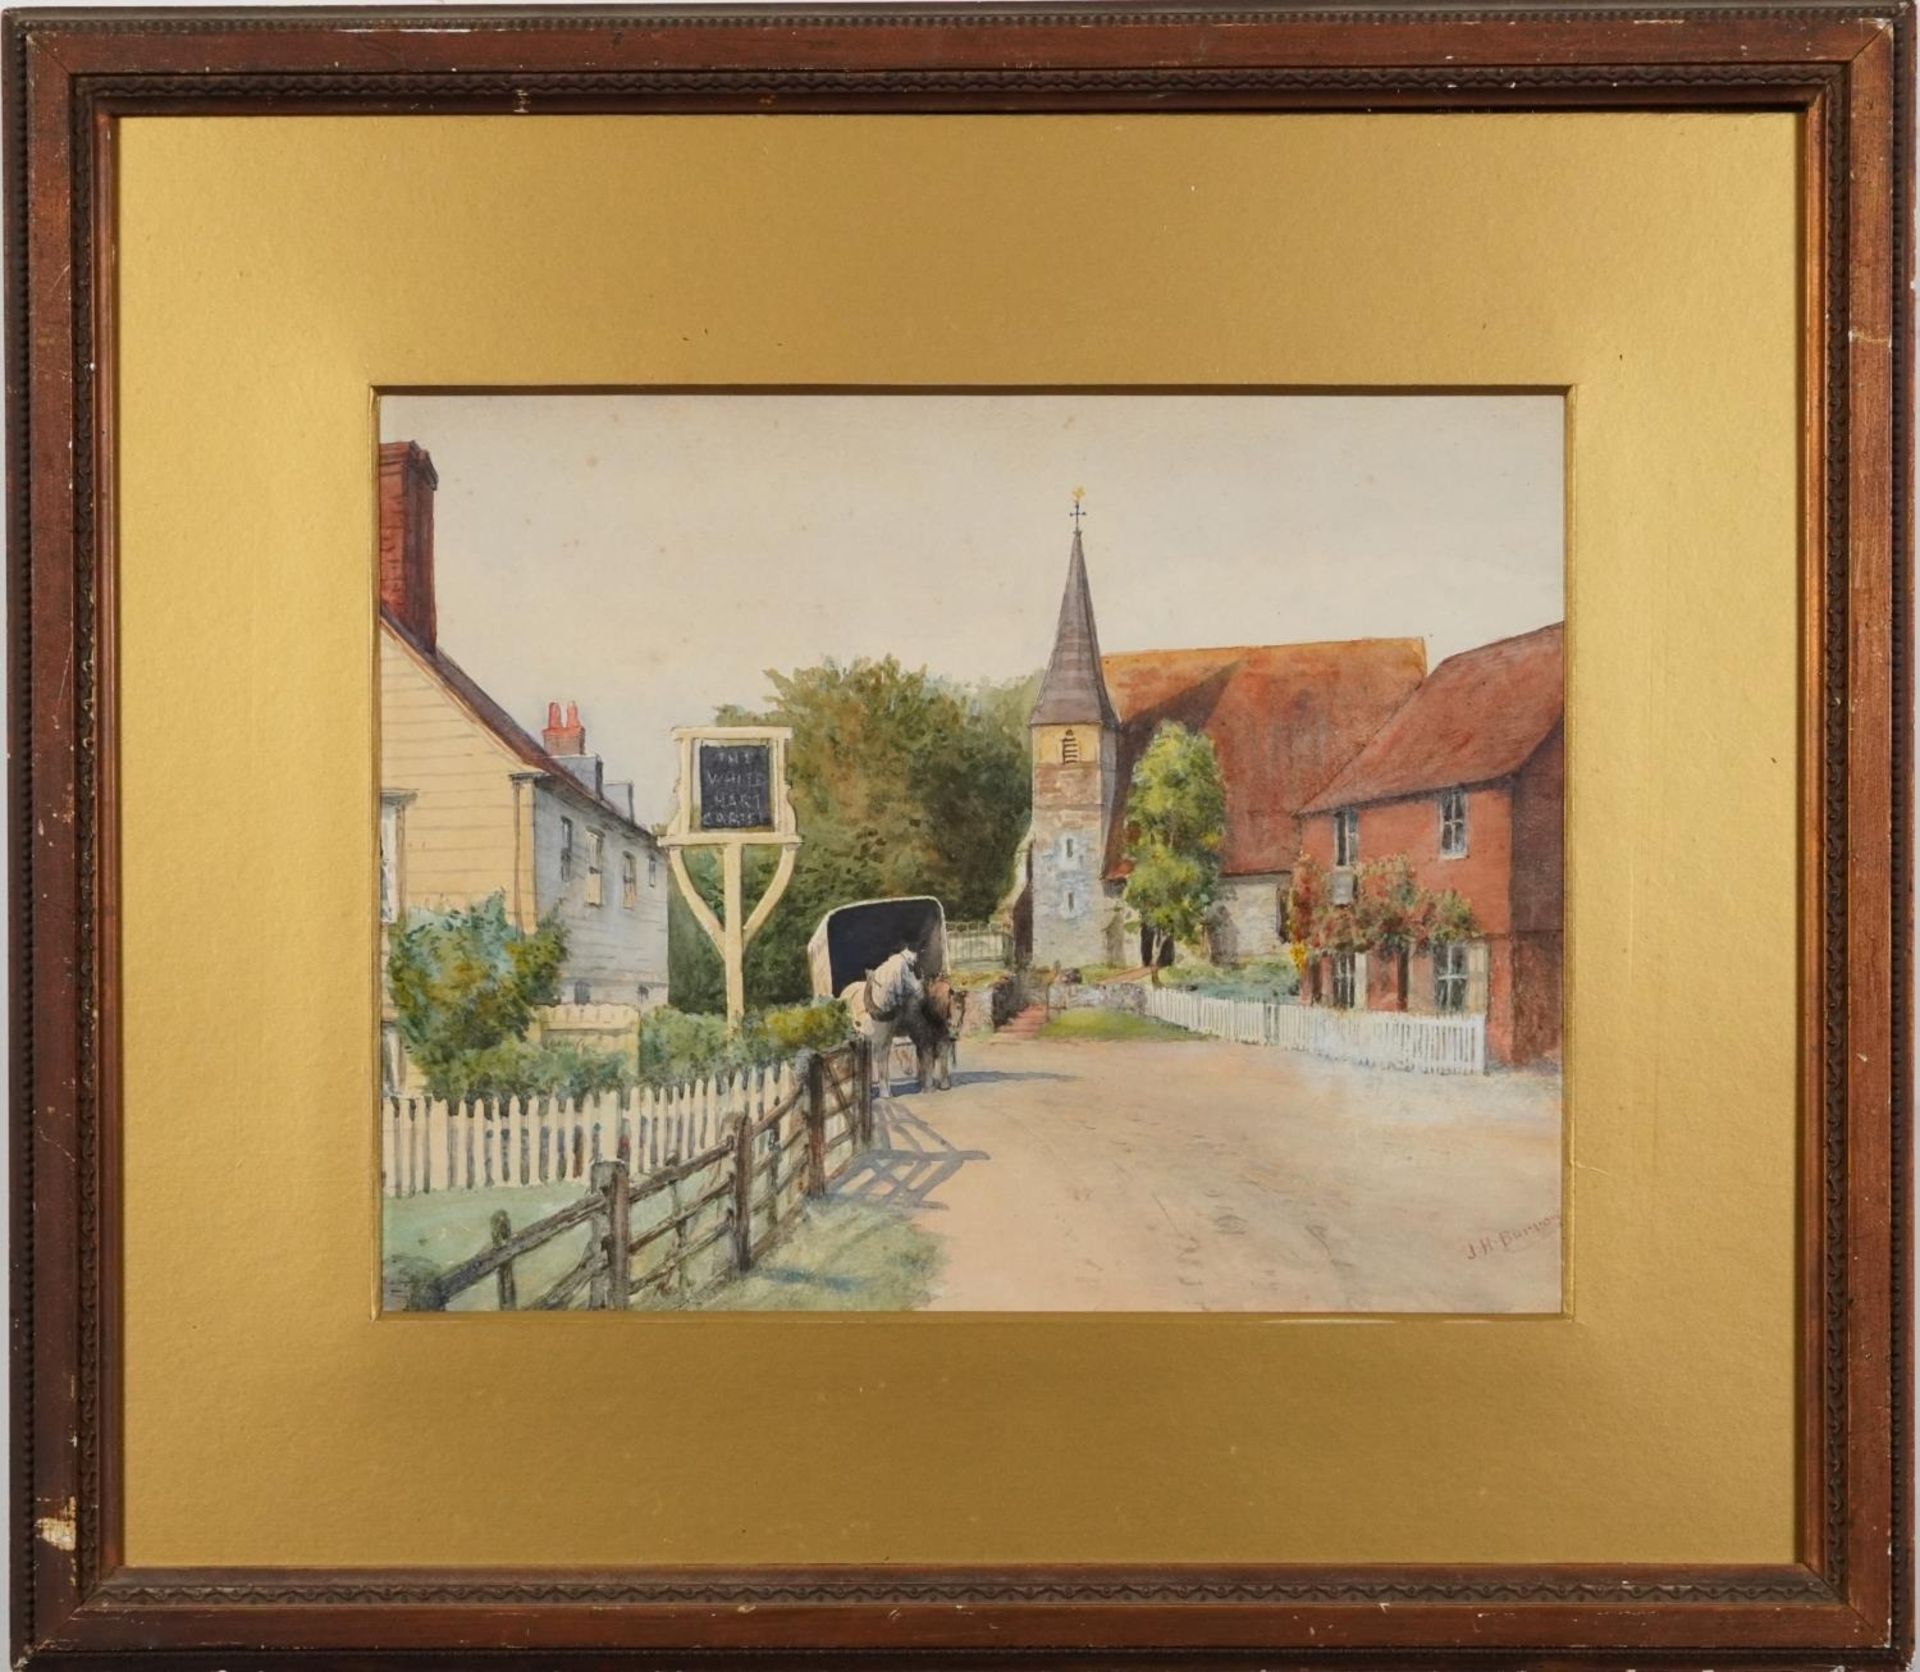 J H Burrow - Street scene with horse and cart, early 20th century watercolour, mounted and framed, - Image 2 of 5